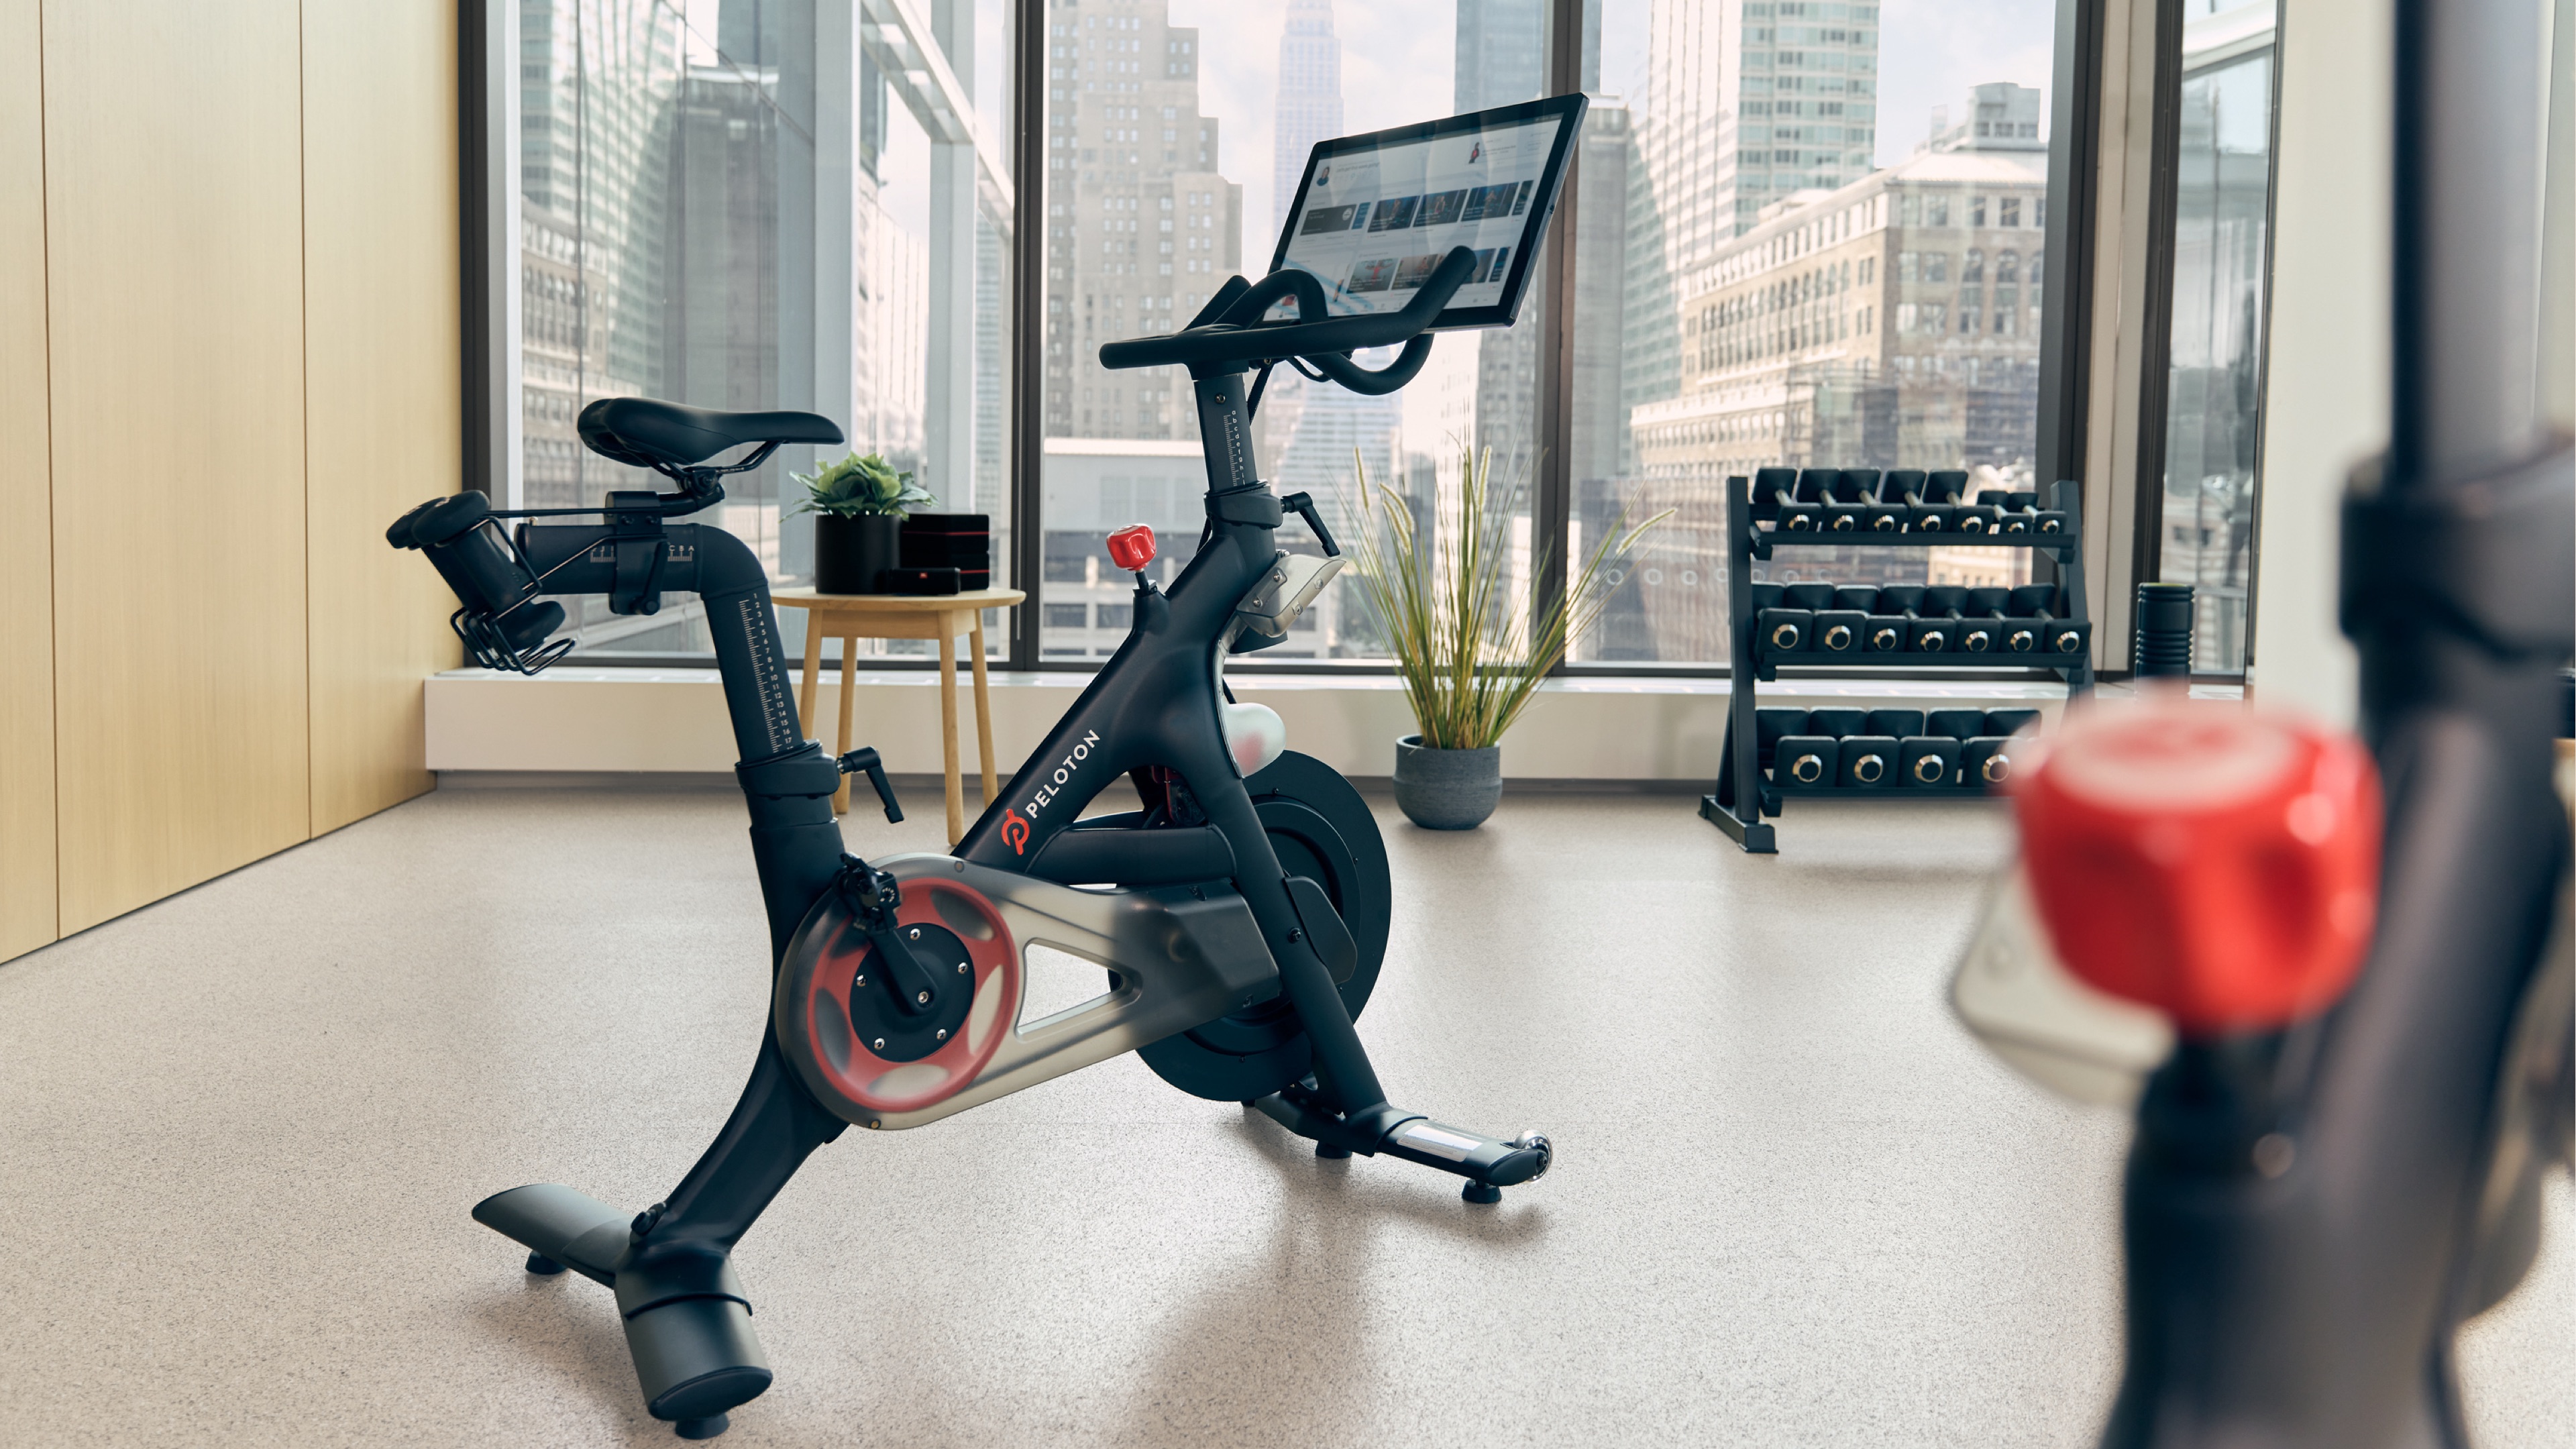 Commercial Peloton Bike For Hotels Residential Buildings Offices Campuses Gyms 